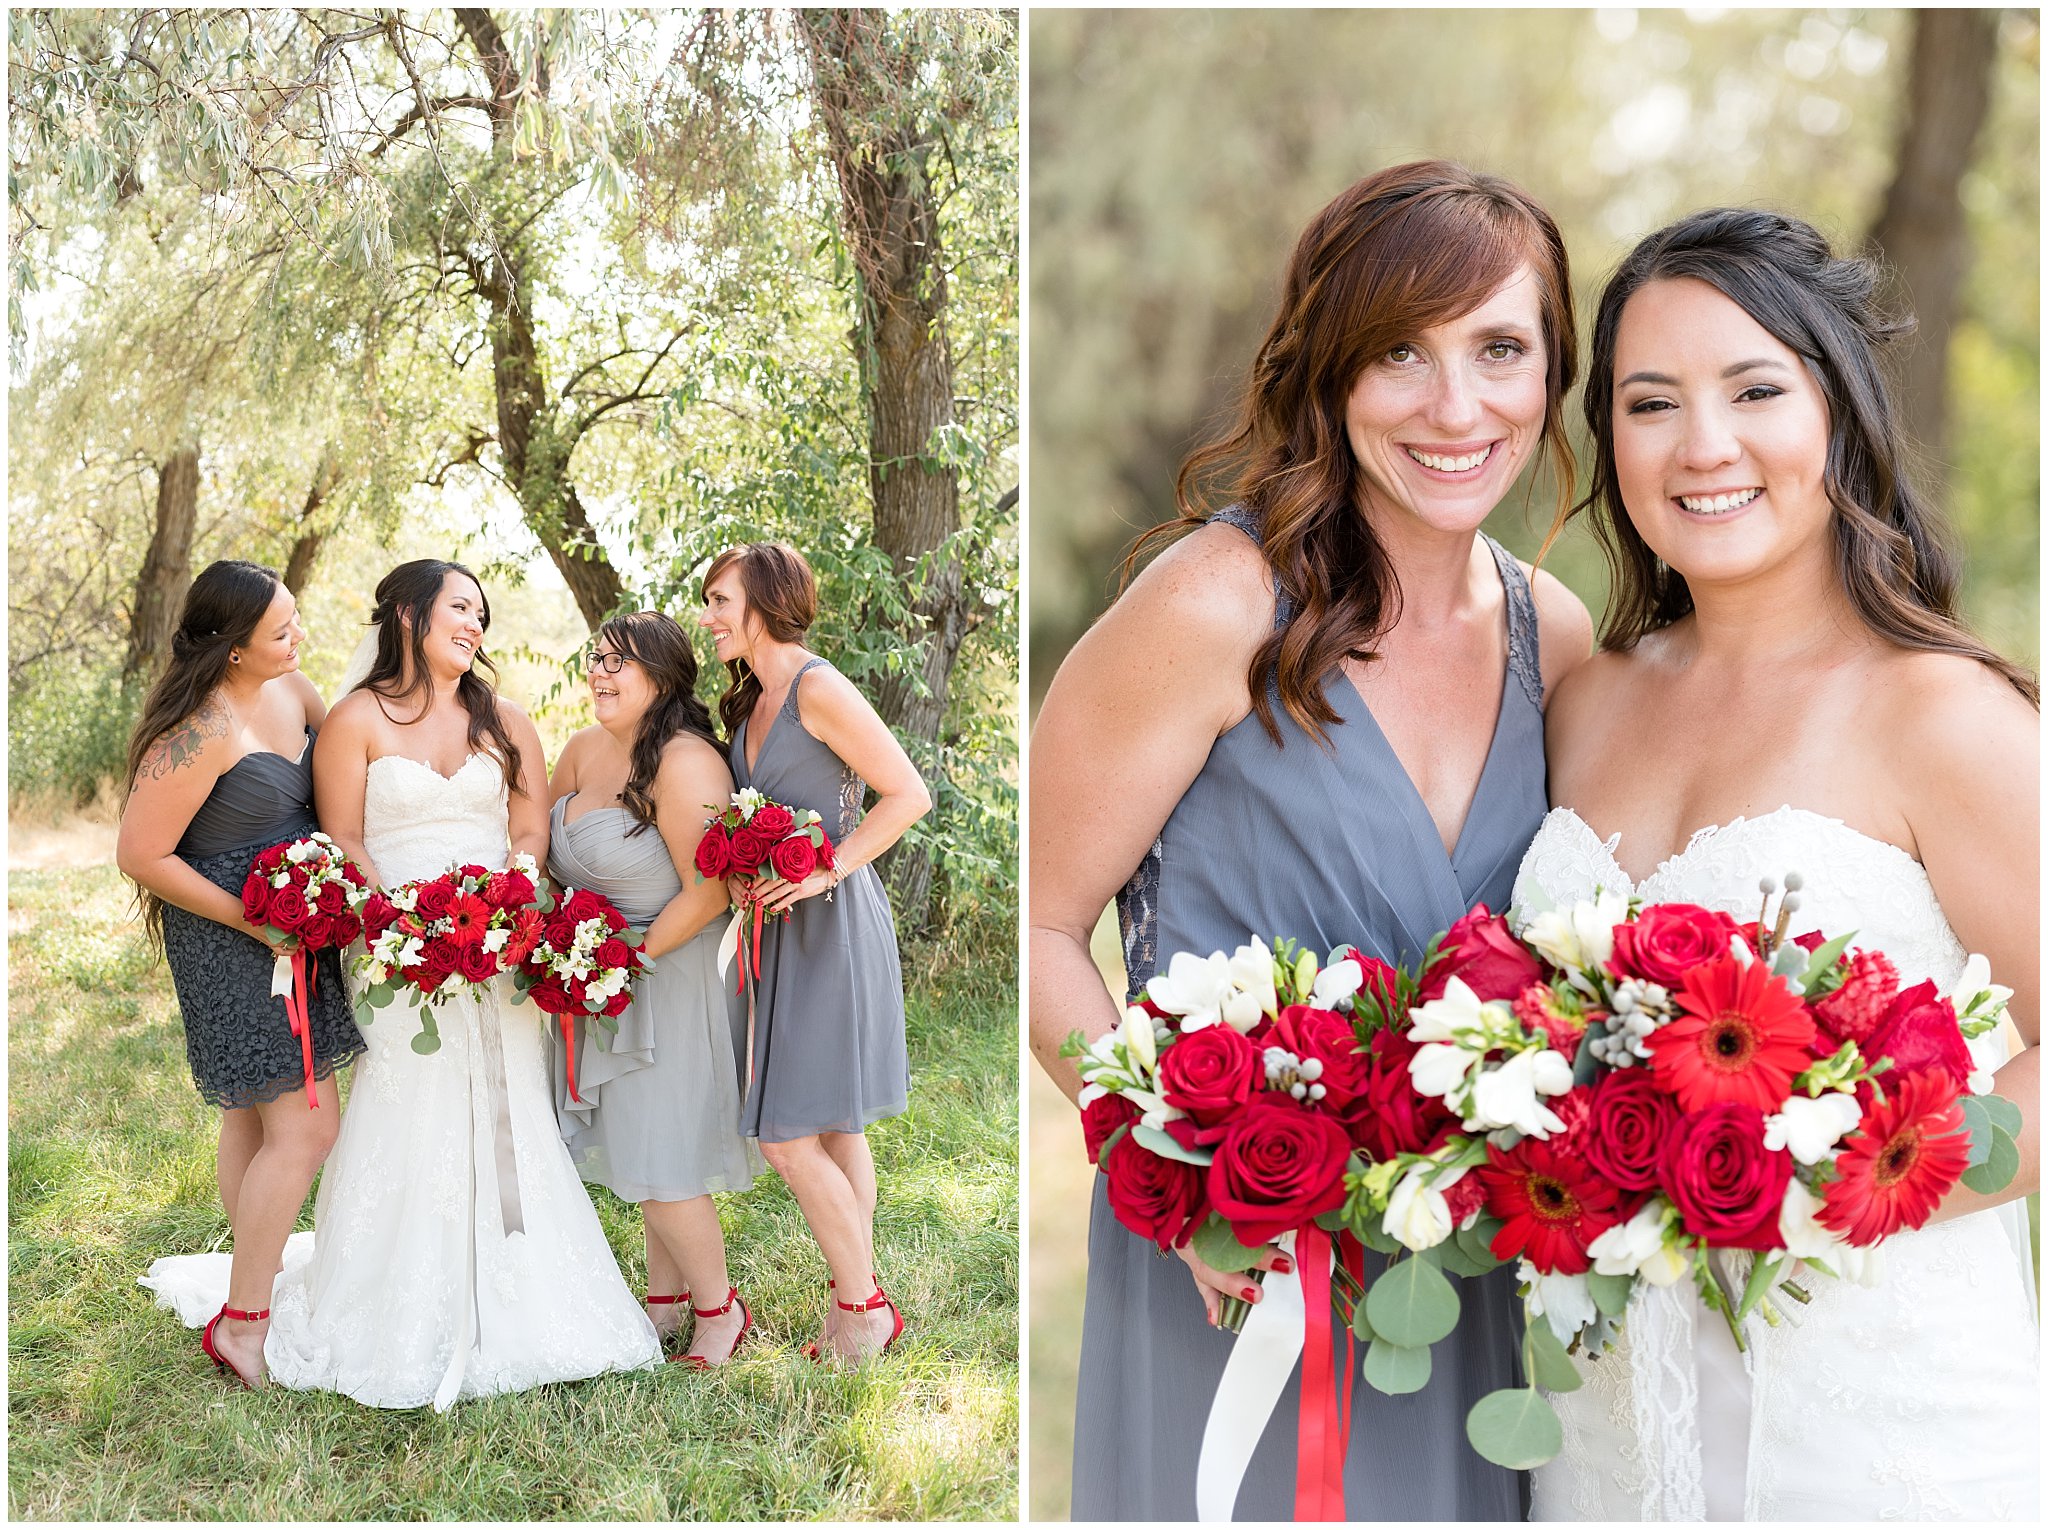 Red and white outdoor wedding | Bride and bridesmaids laughing | Davis County Outdoor Wedding | Jessie and Dallin Photography